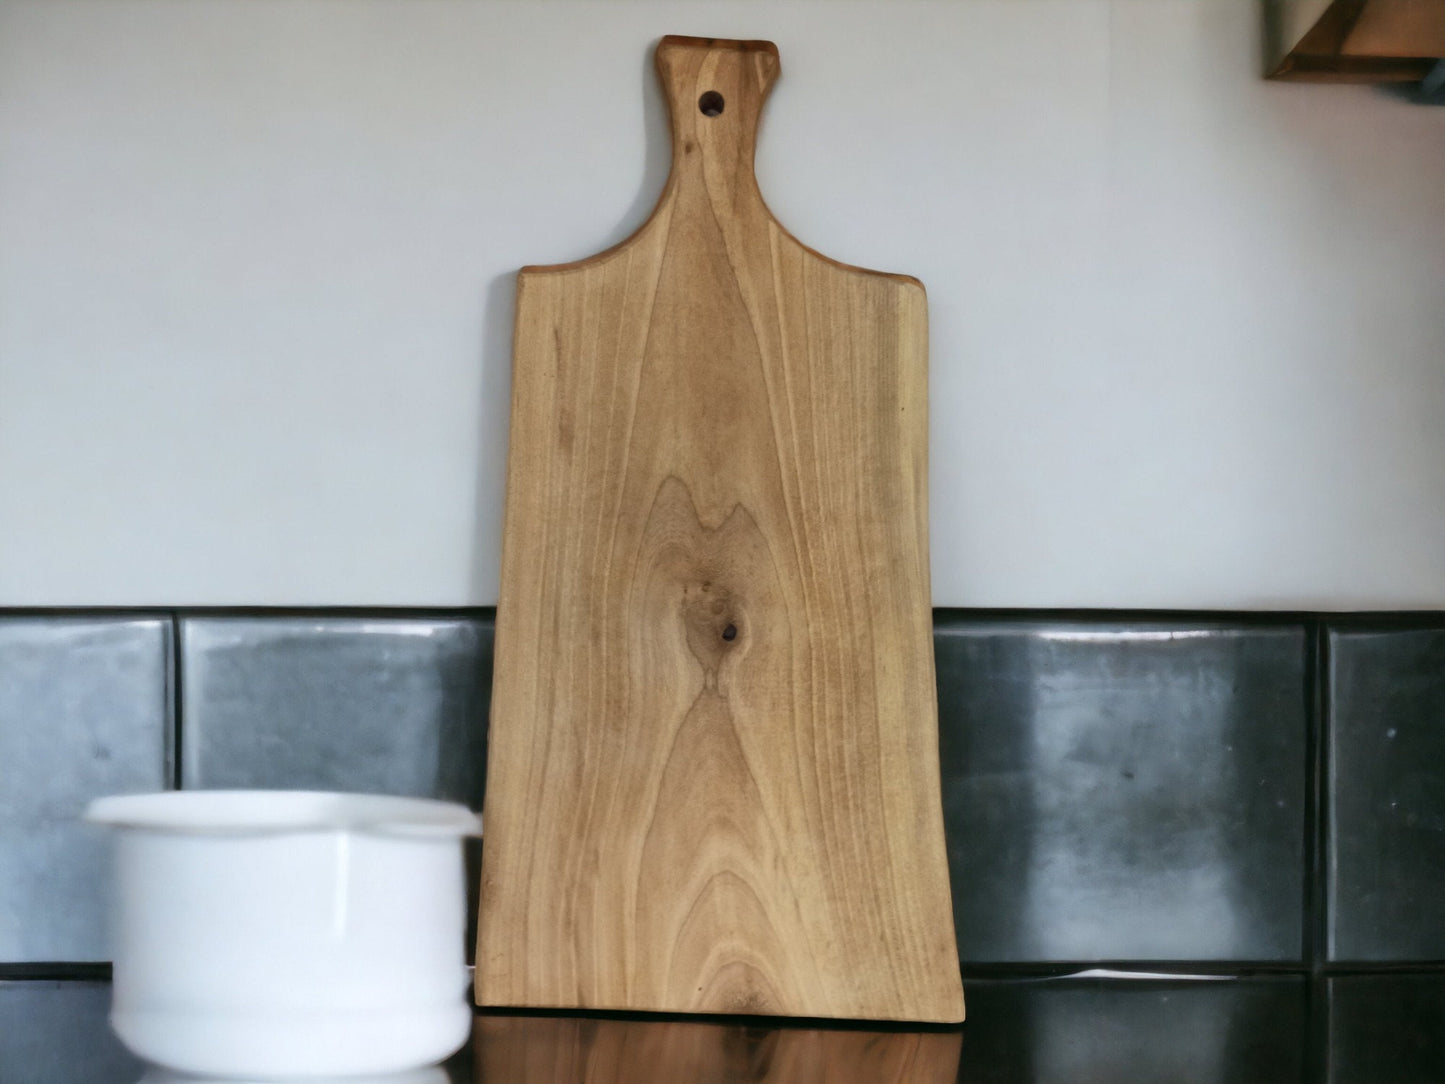 Premium Walnut Cutting Board, Wedding Gift, Christmas Present, Handcrafted Wooden Board with and without Handle - Kitchen Artistry